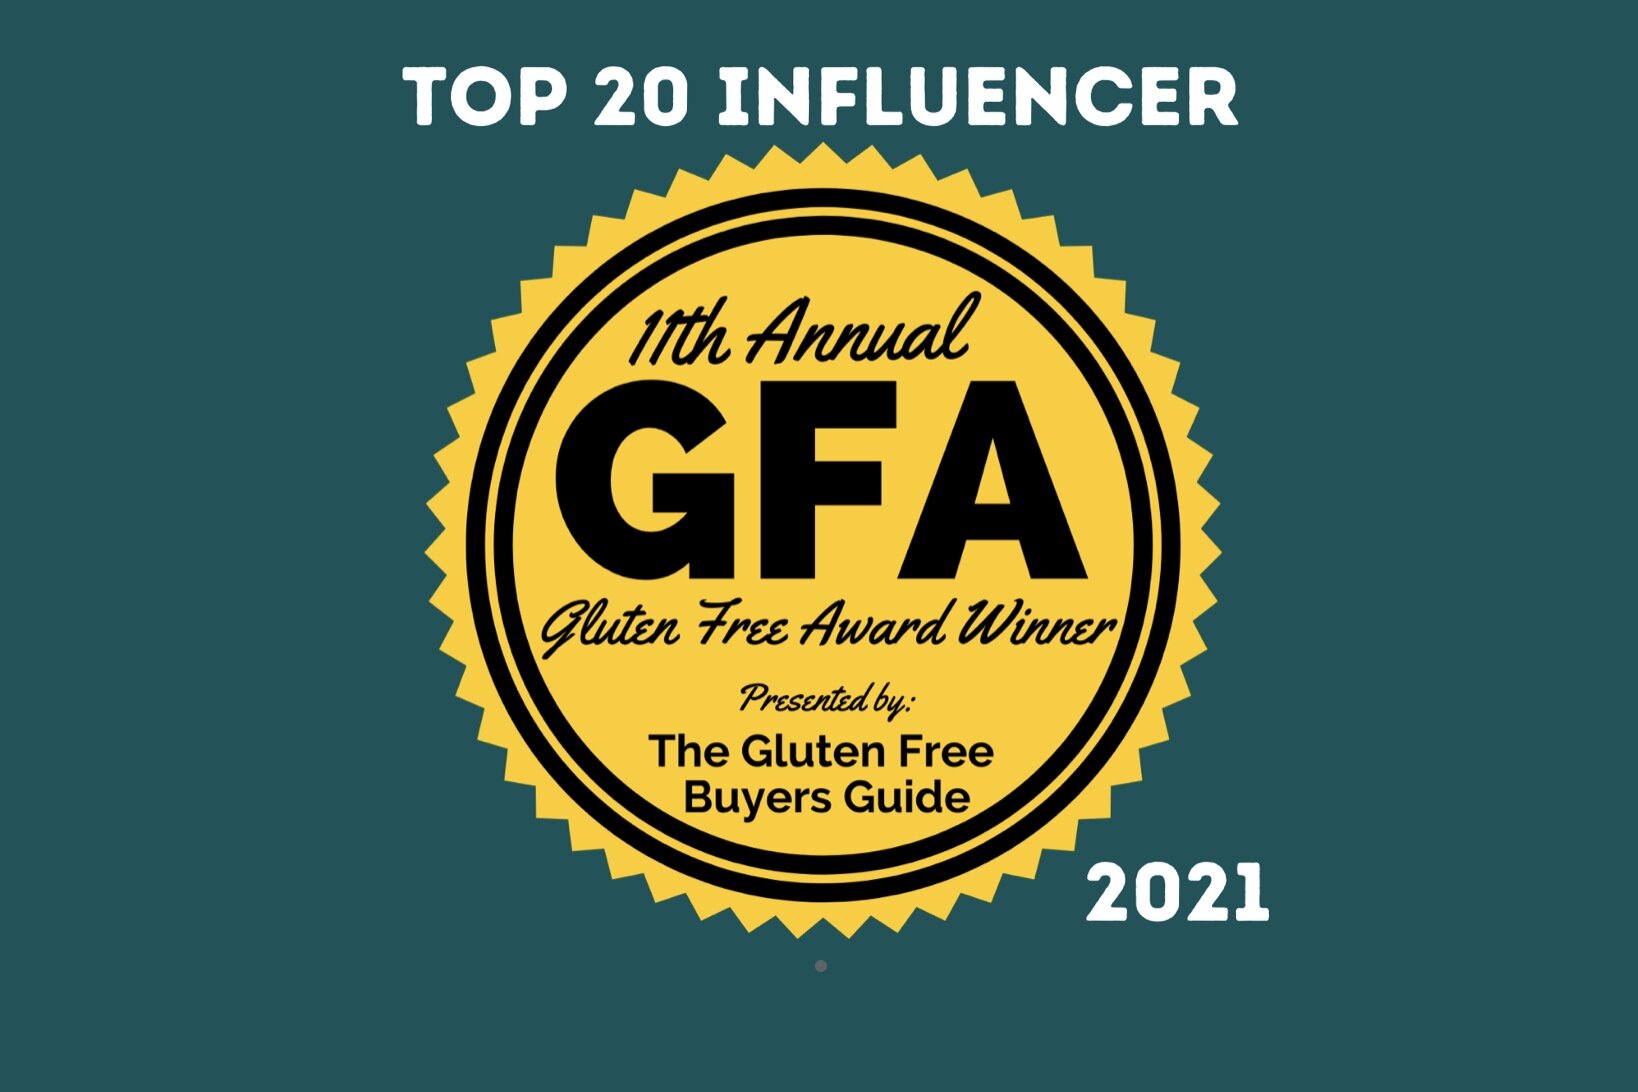 Named a Top 20 Influencer in The Gluten Free Buyer's Guide Awards